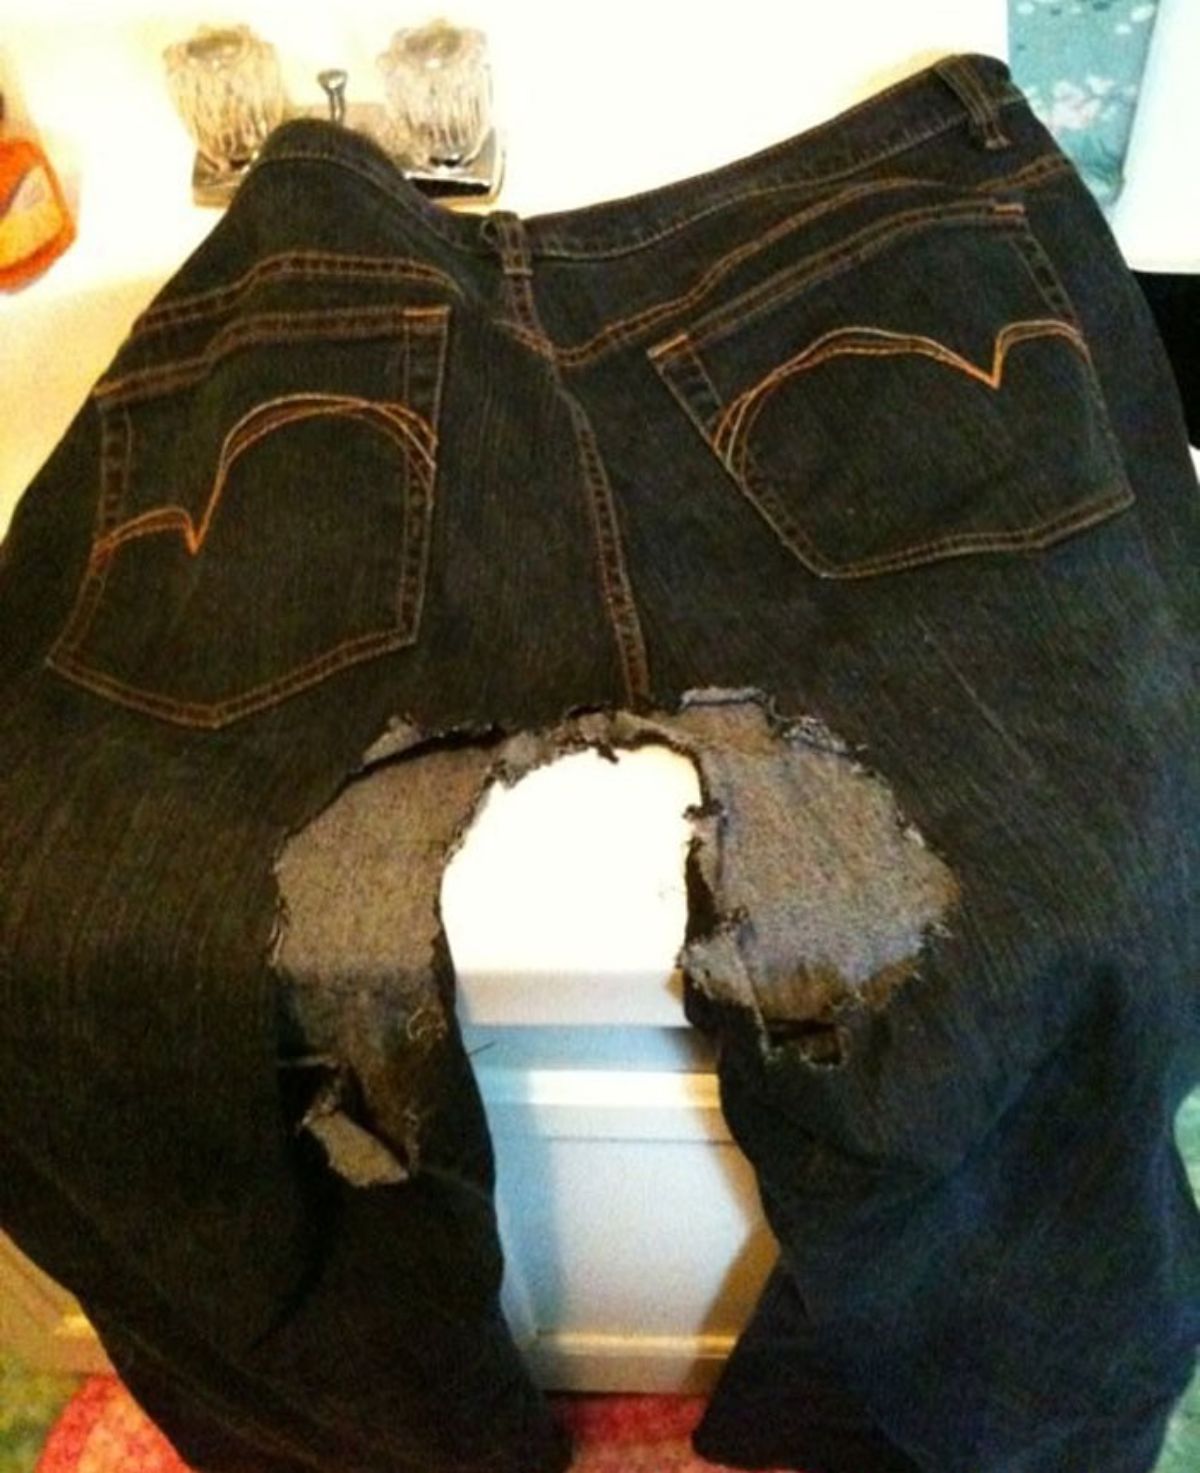 black denim jeans with the crotch area ripped up by a dog